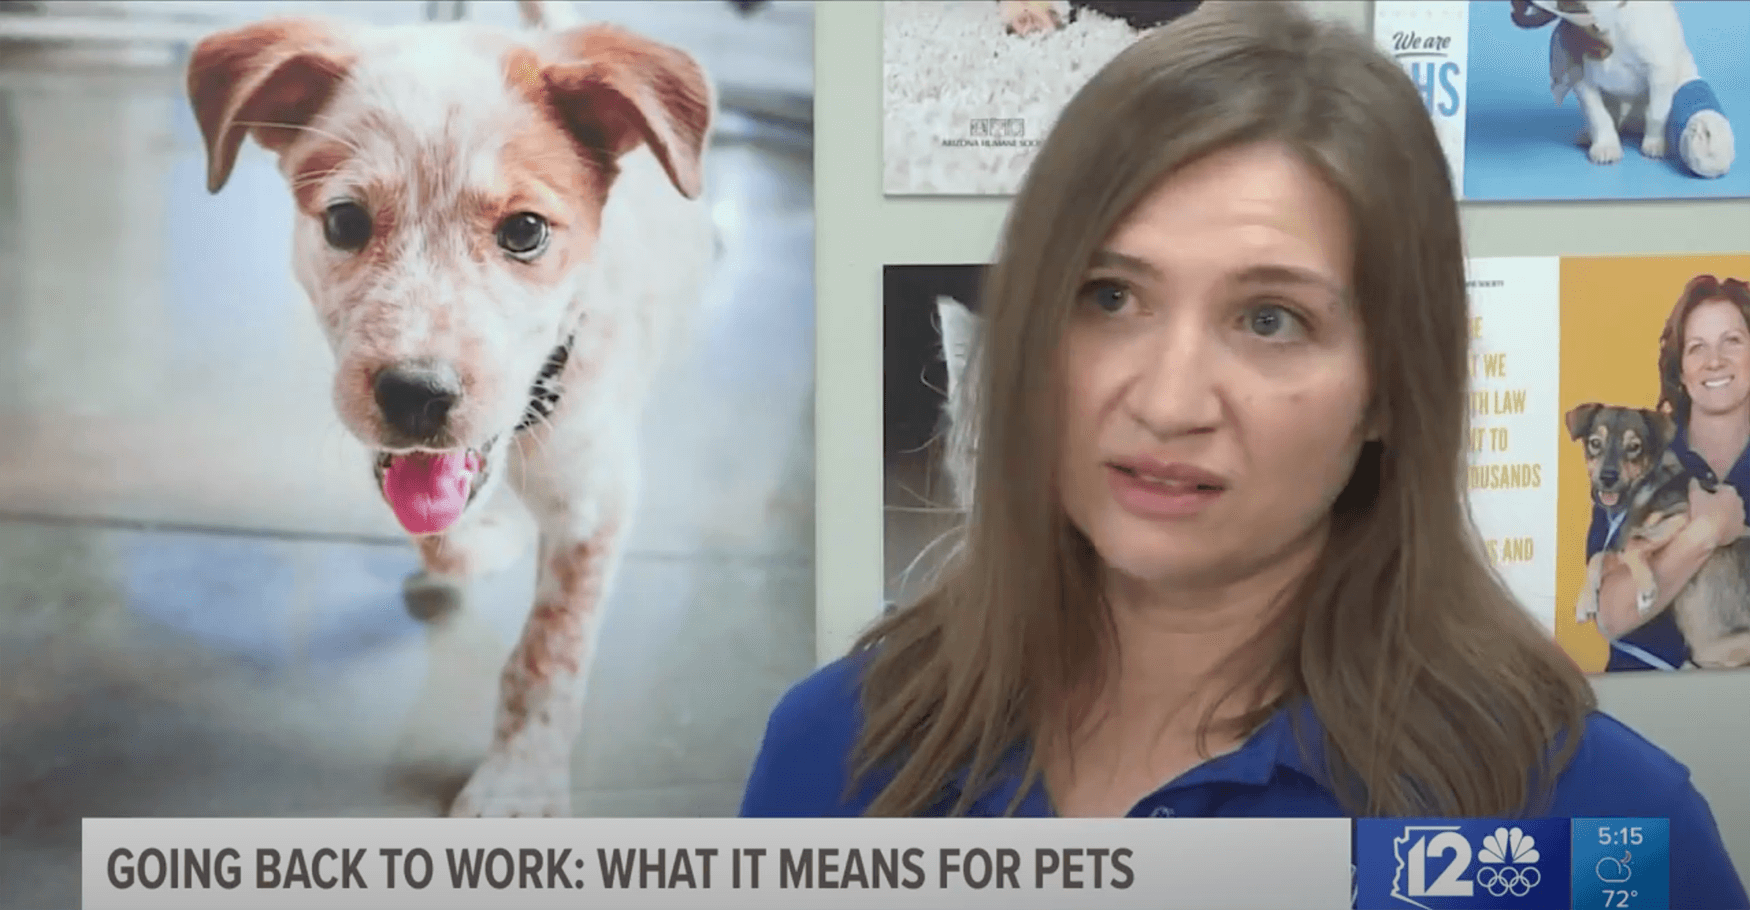 AHS discusses post-quarantine for pets on the news